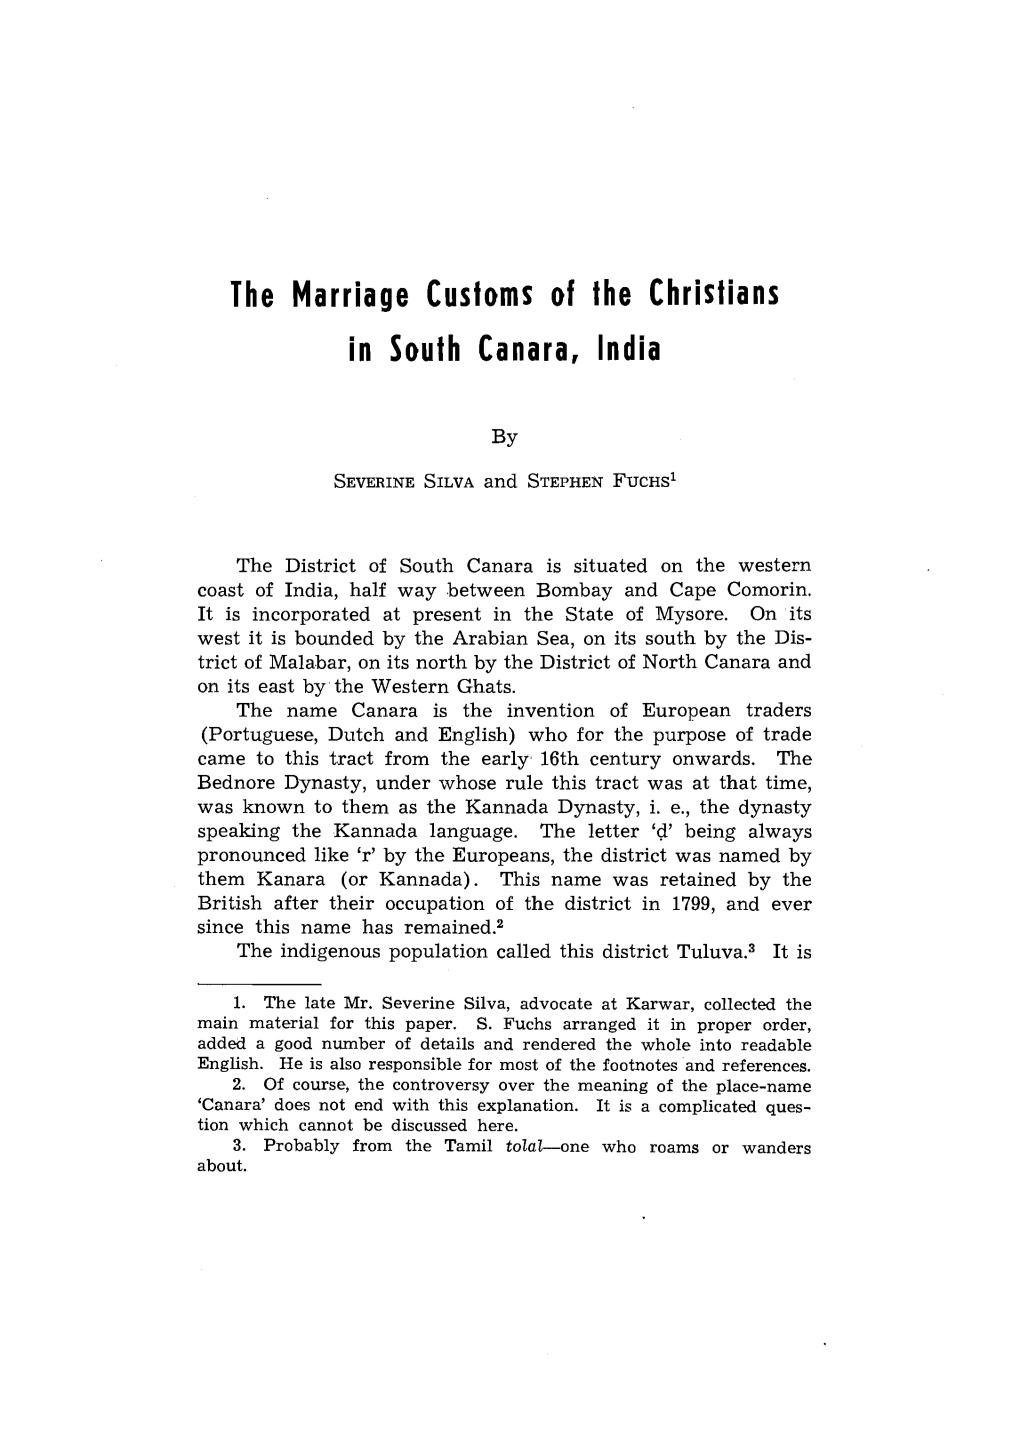 The Marriage Customs of the Christians in South Canara, India